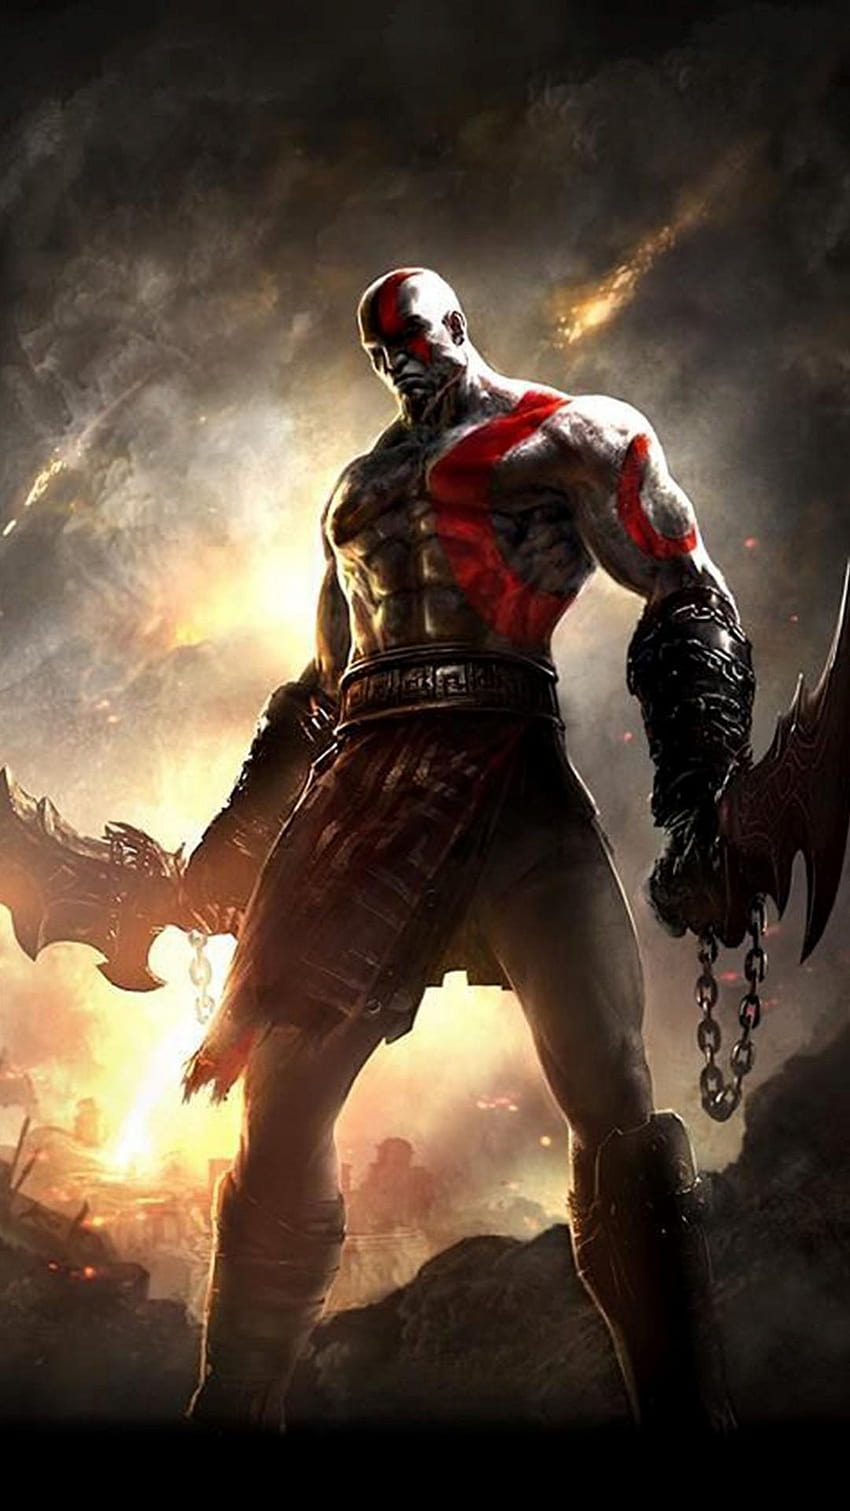 God of War Kratos for Android, god of war android HD phone wallpaper